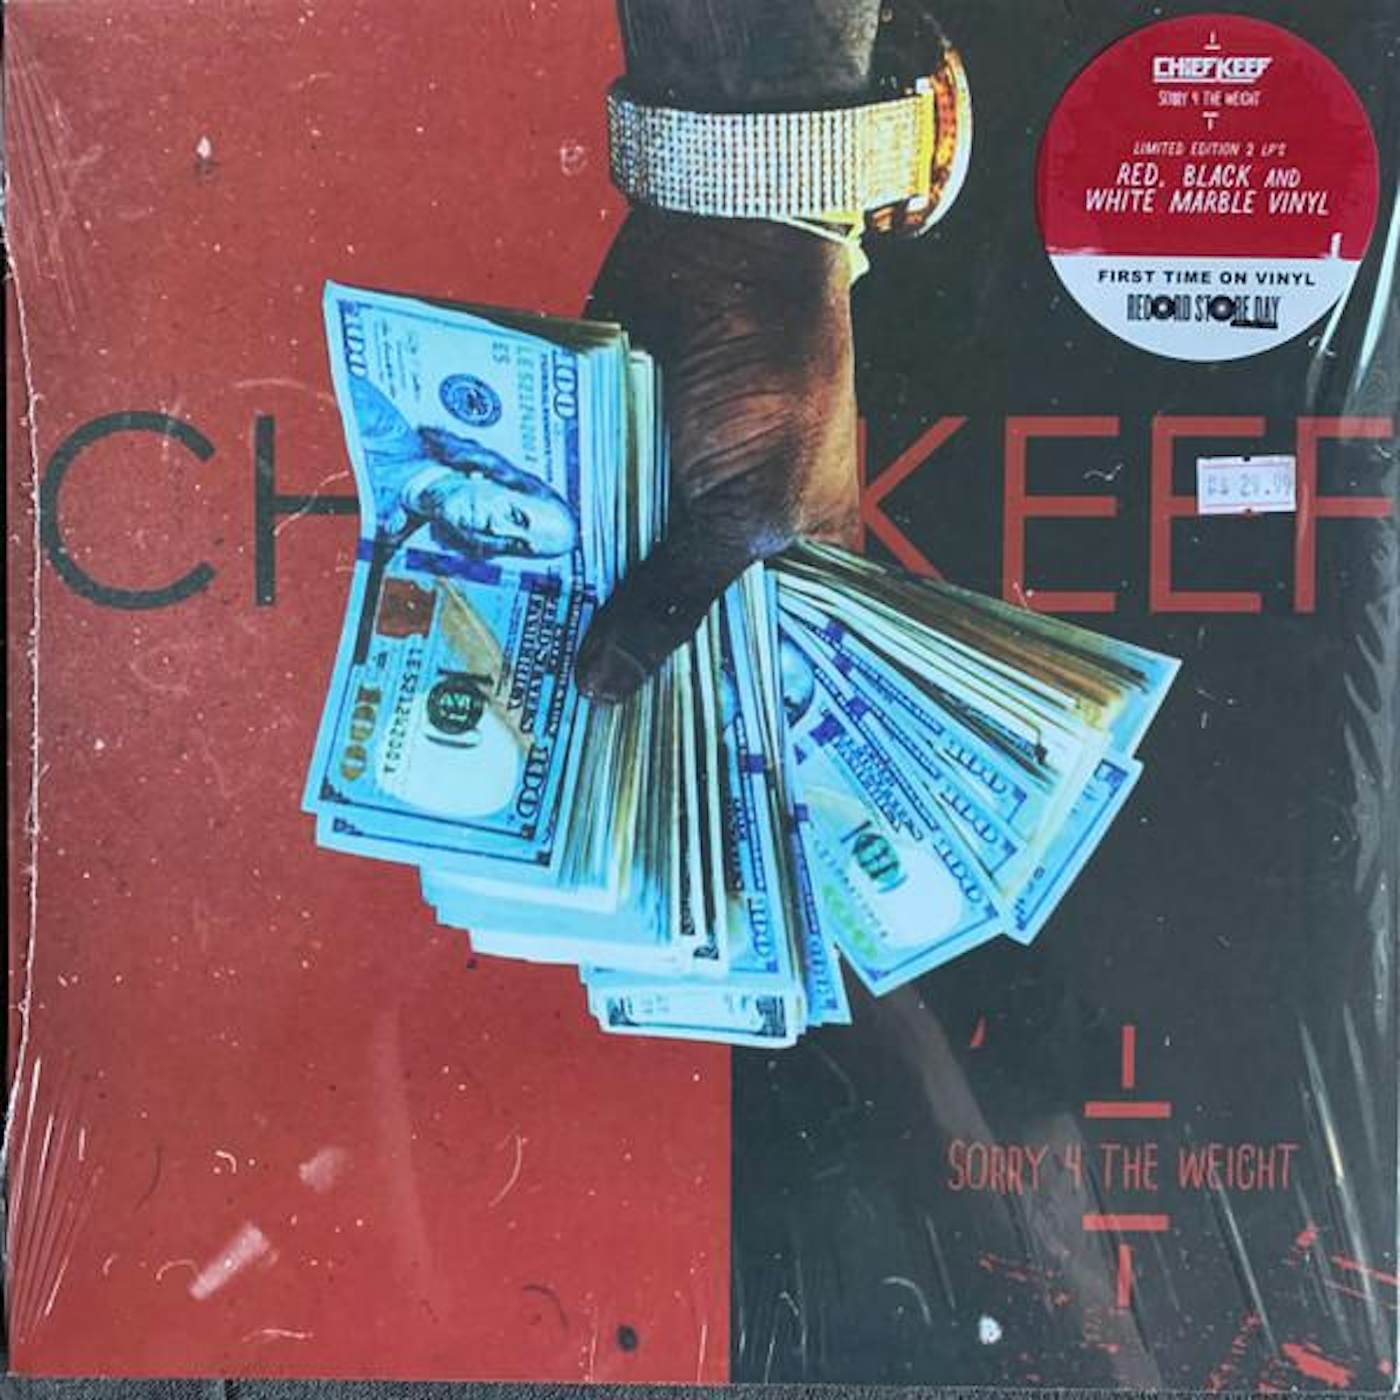 Chief Keef SORRY 4 THE WEIGHT (DELUXE EDITION) (RSD) Vinyl Record